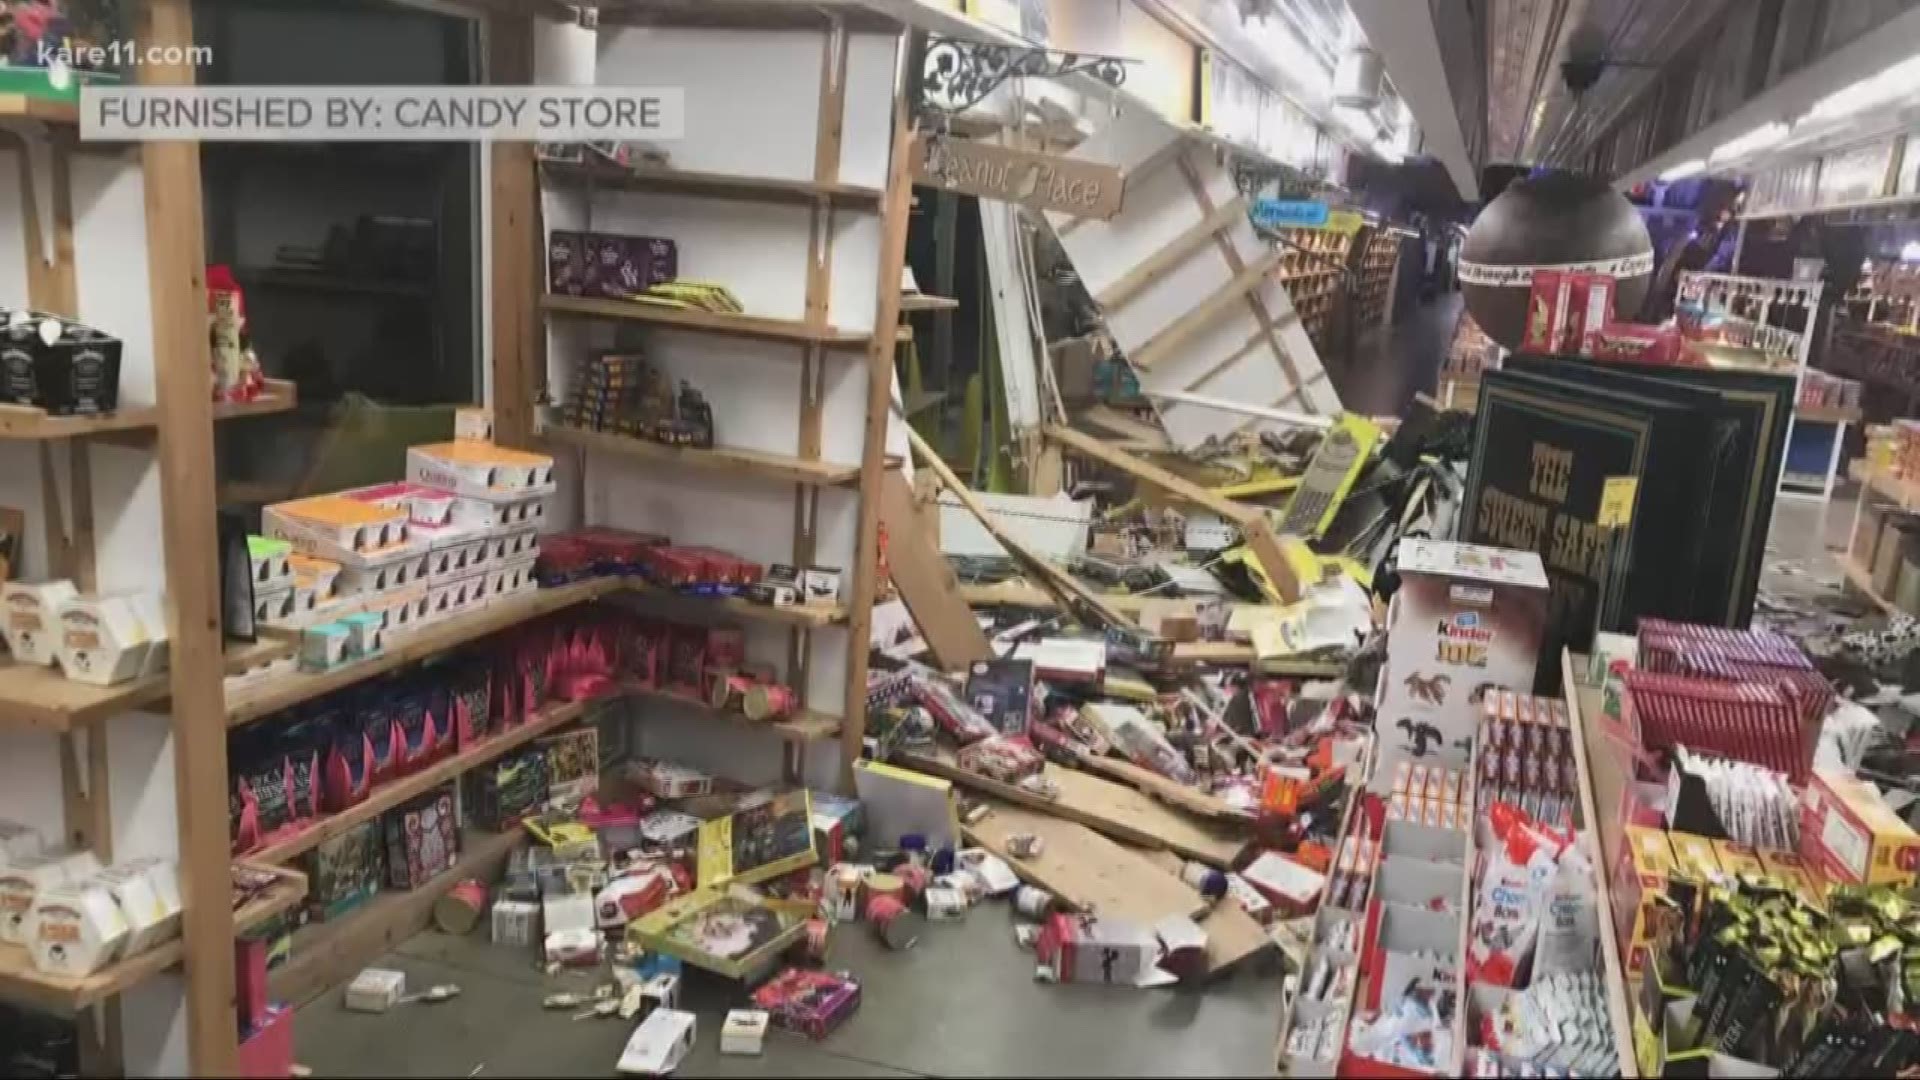 Employees are fixing and cleaning up their store after a car crashed into Minnesota's Largest Candy Store in Jordan.